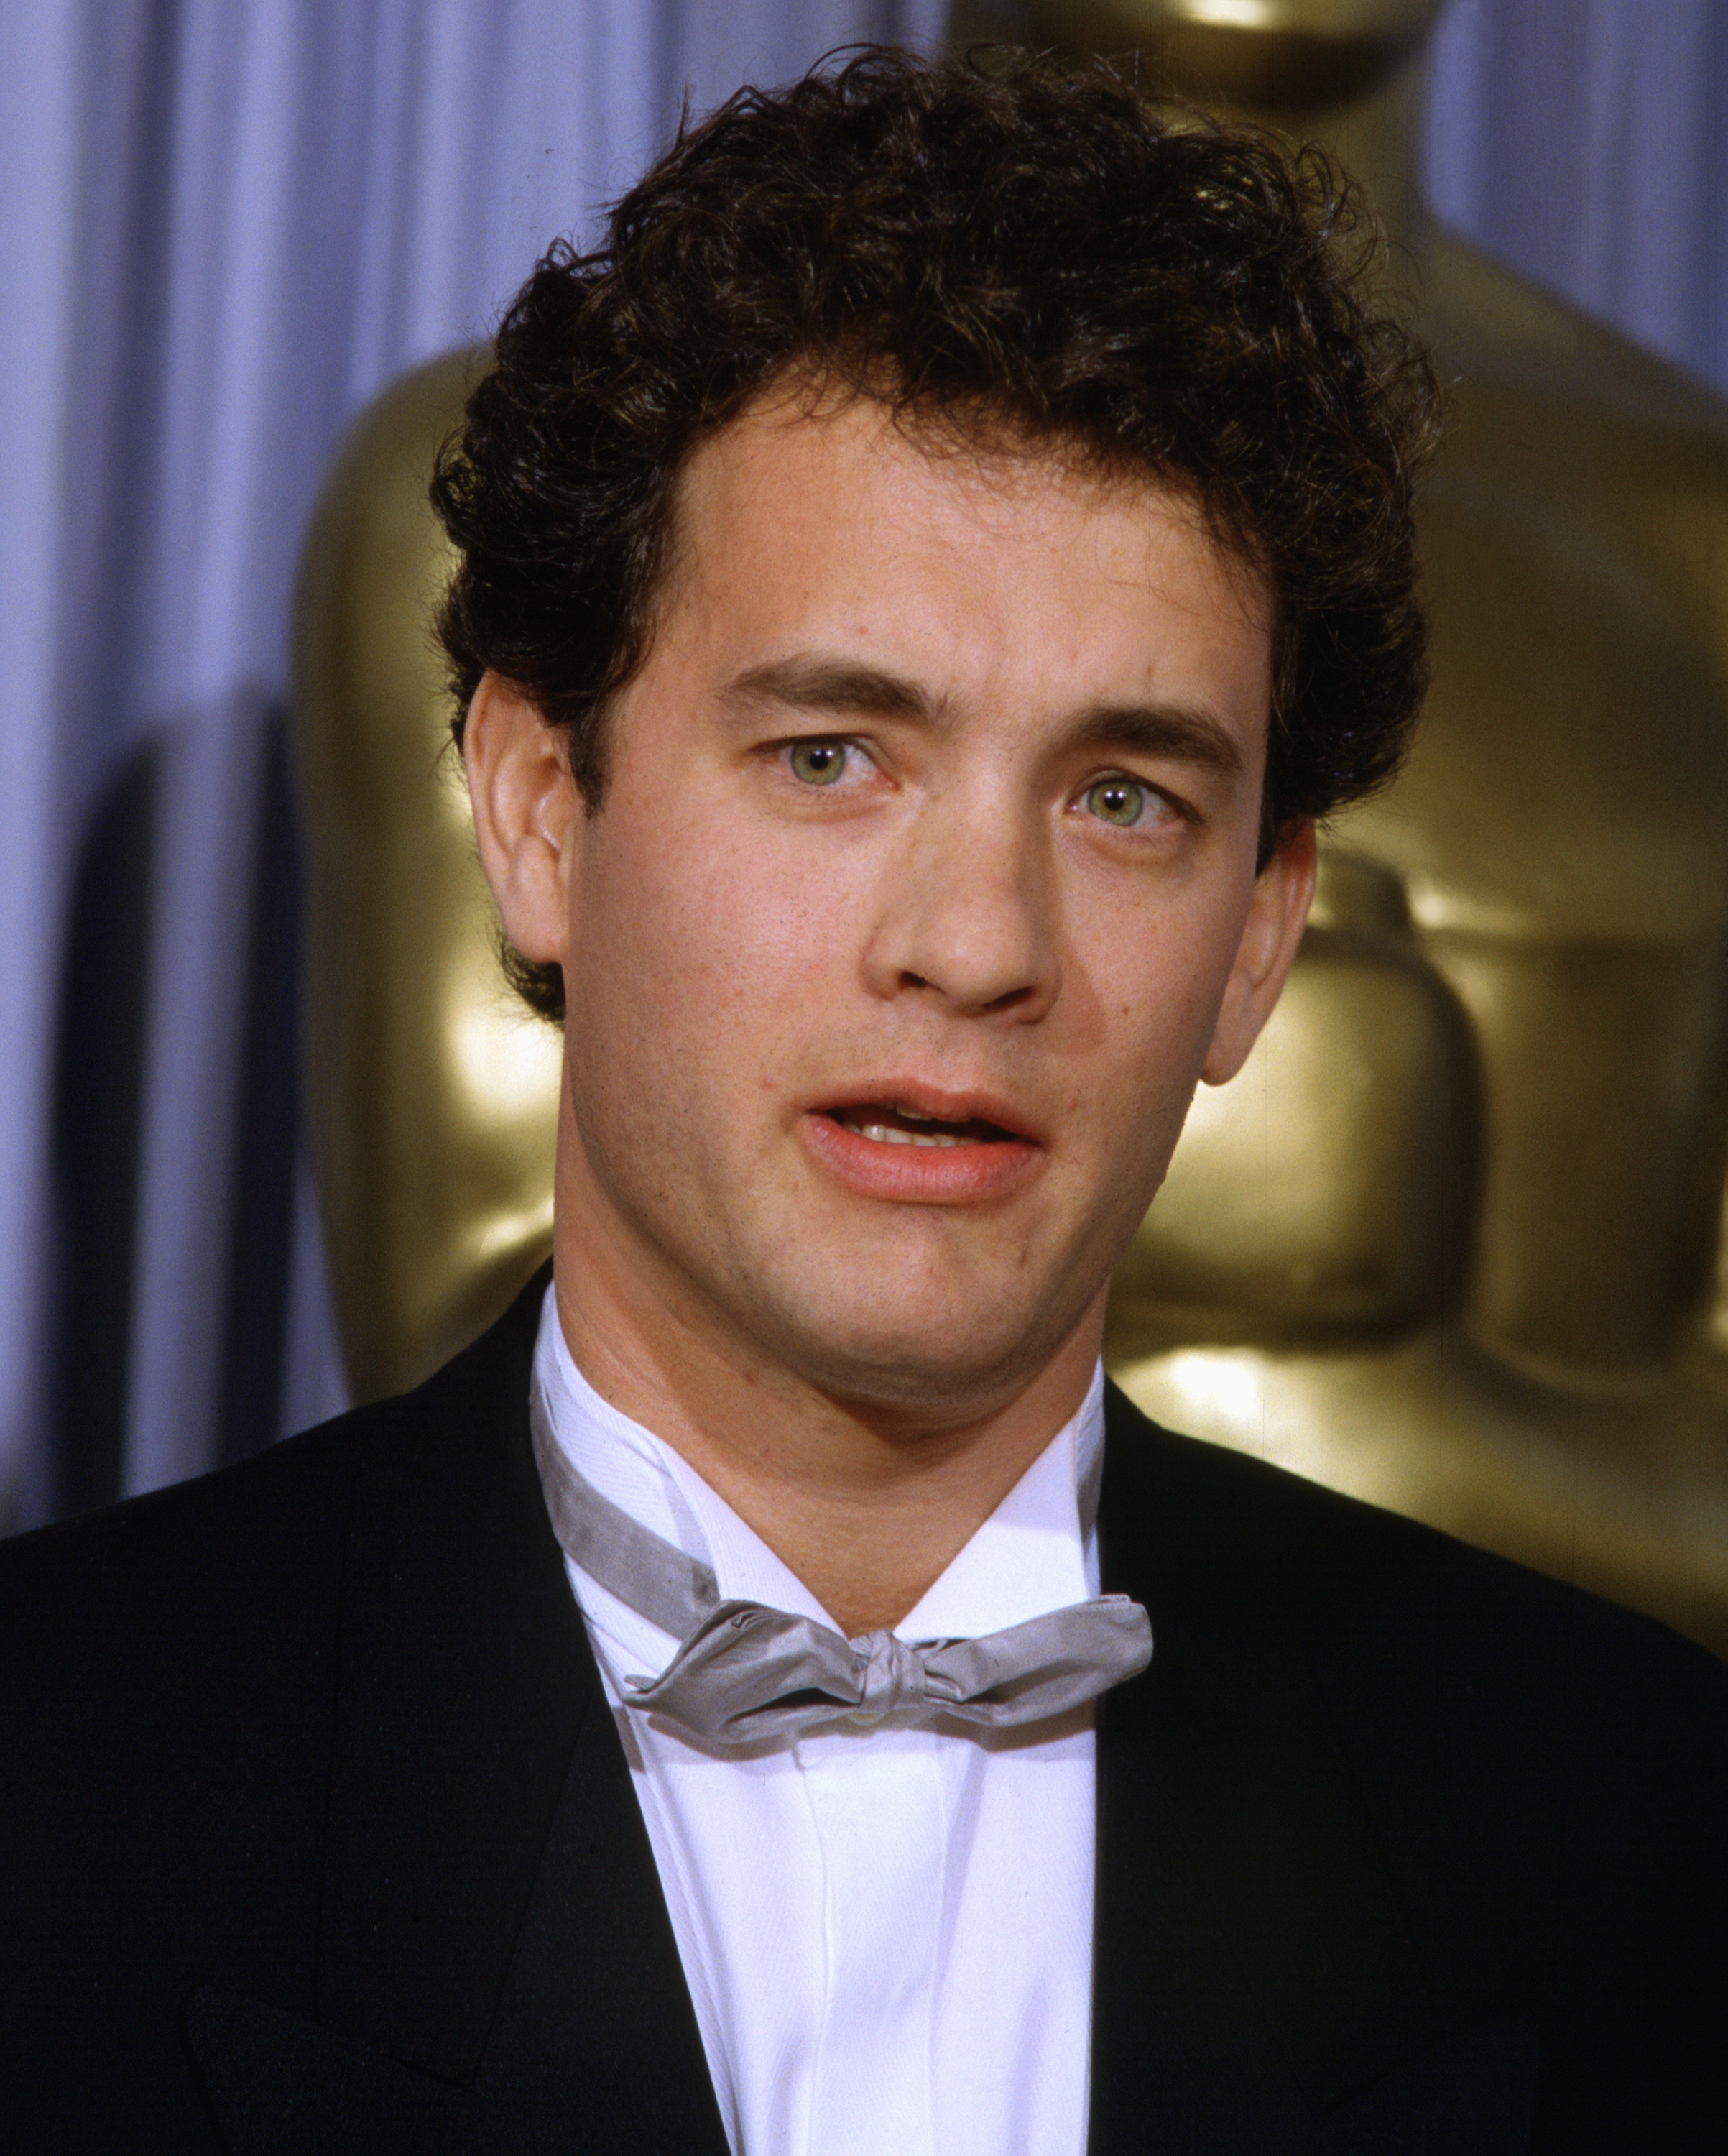 Tom Hanks on March 30, 1987 in Los Angeles, California | Source: Getty Images